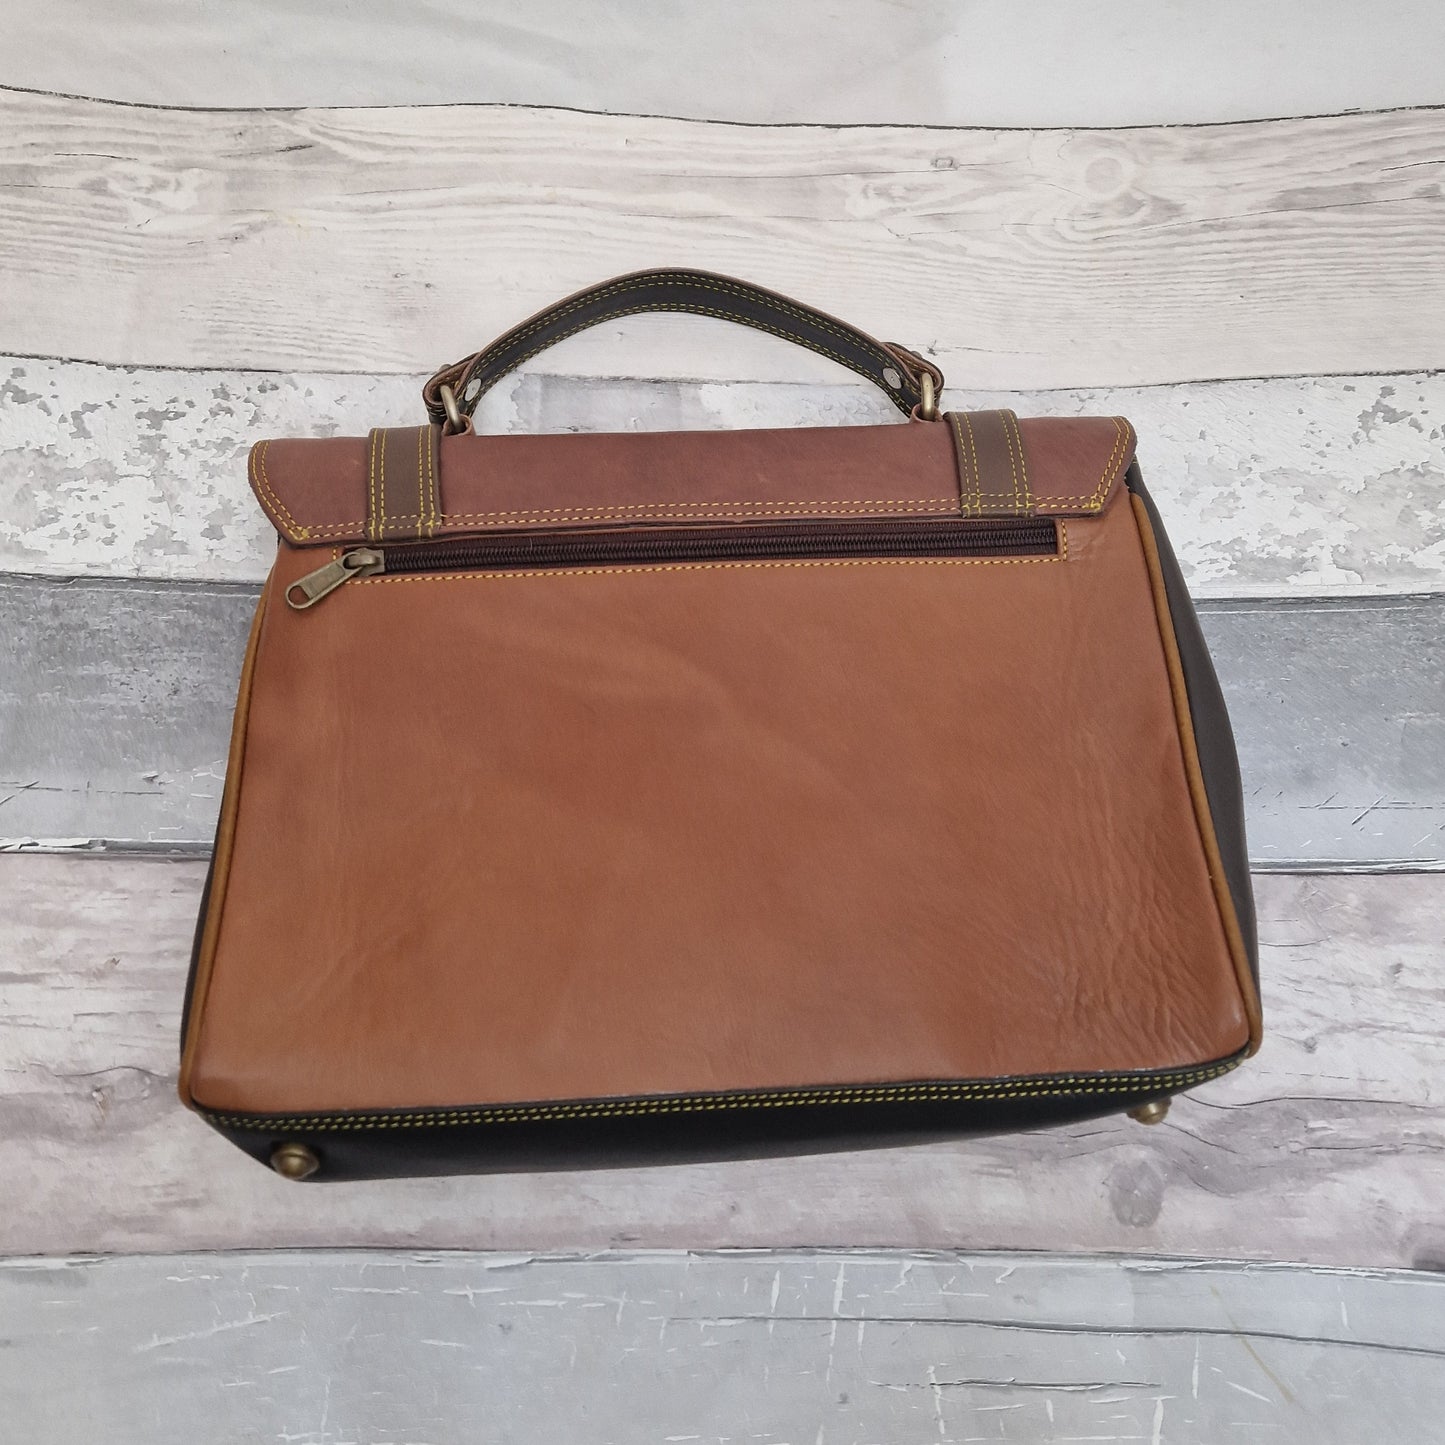 Satchel style leather bag in mulitple shades of brown, finished with brass fixings and buckles.